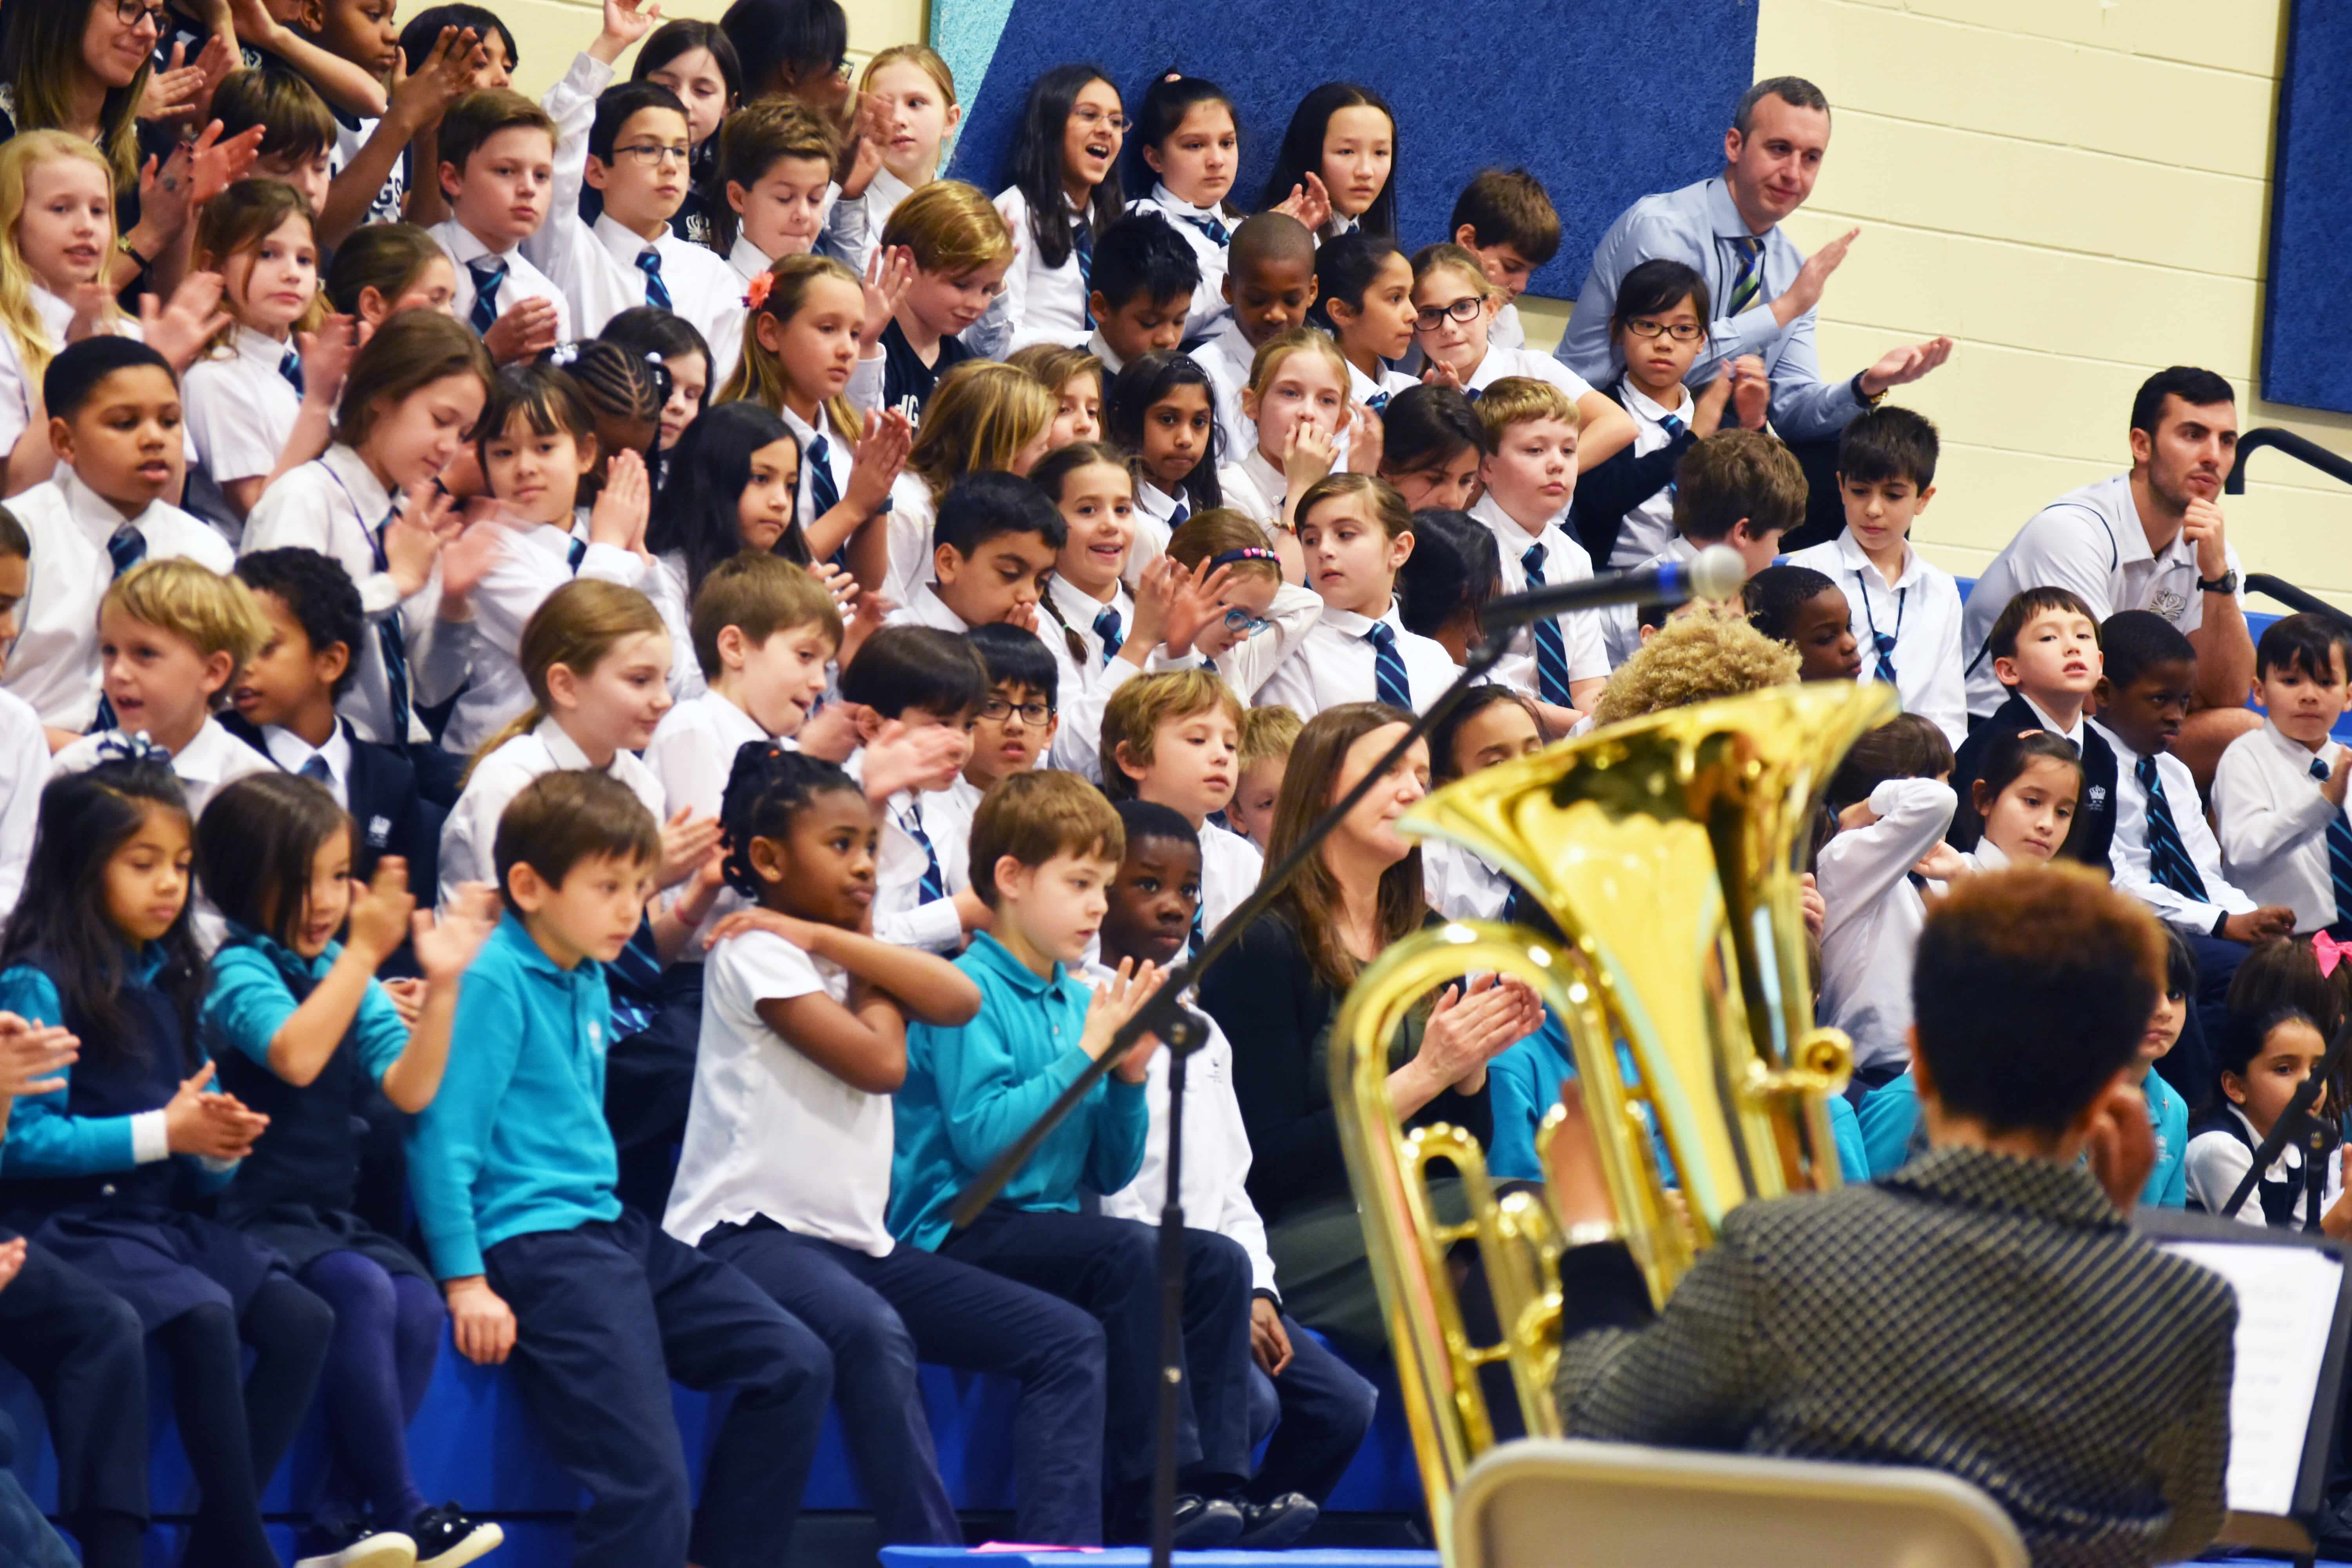 Brass Quintet Performs Live for Students - brass-quintet-performs-live-for-students